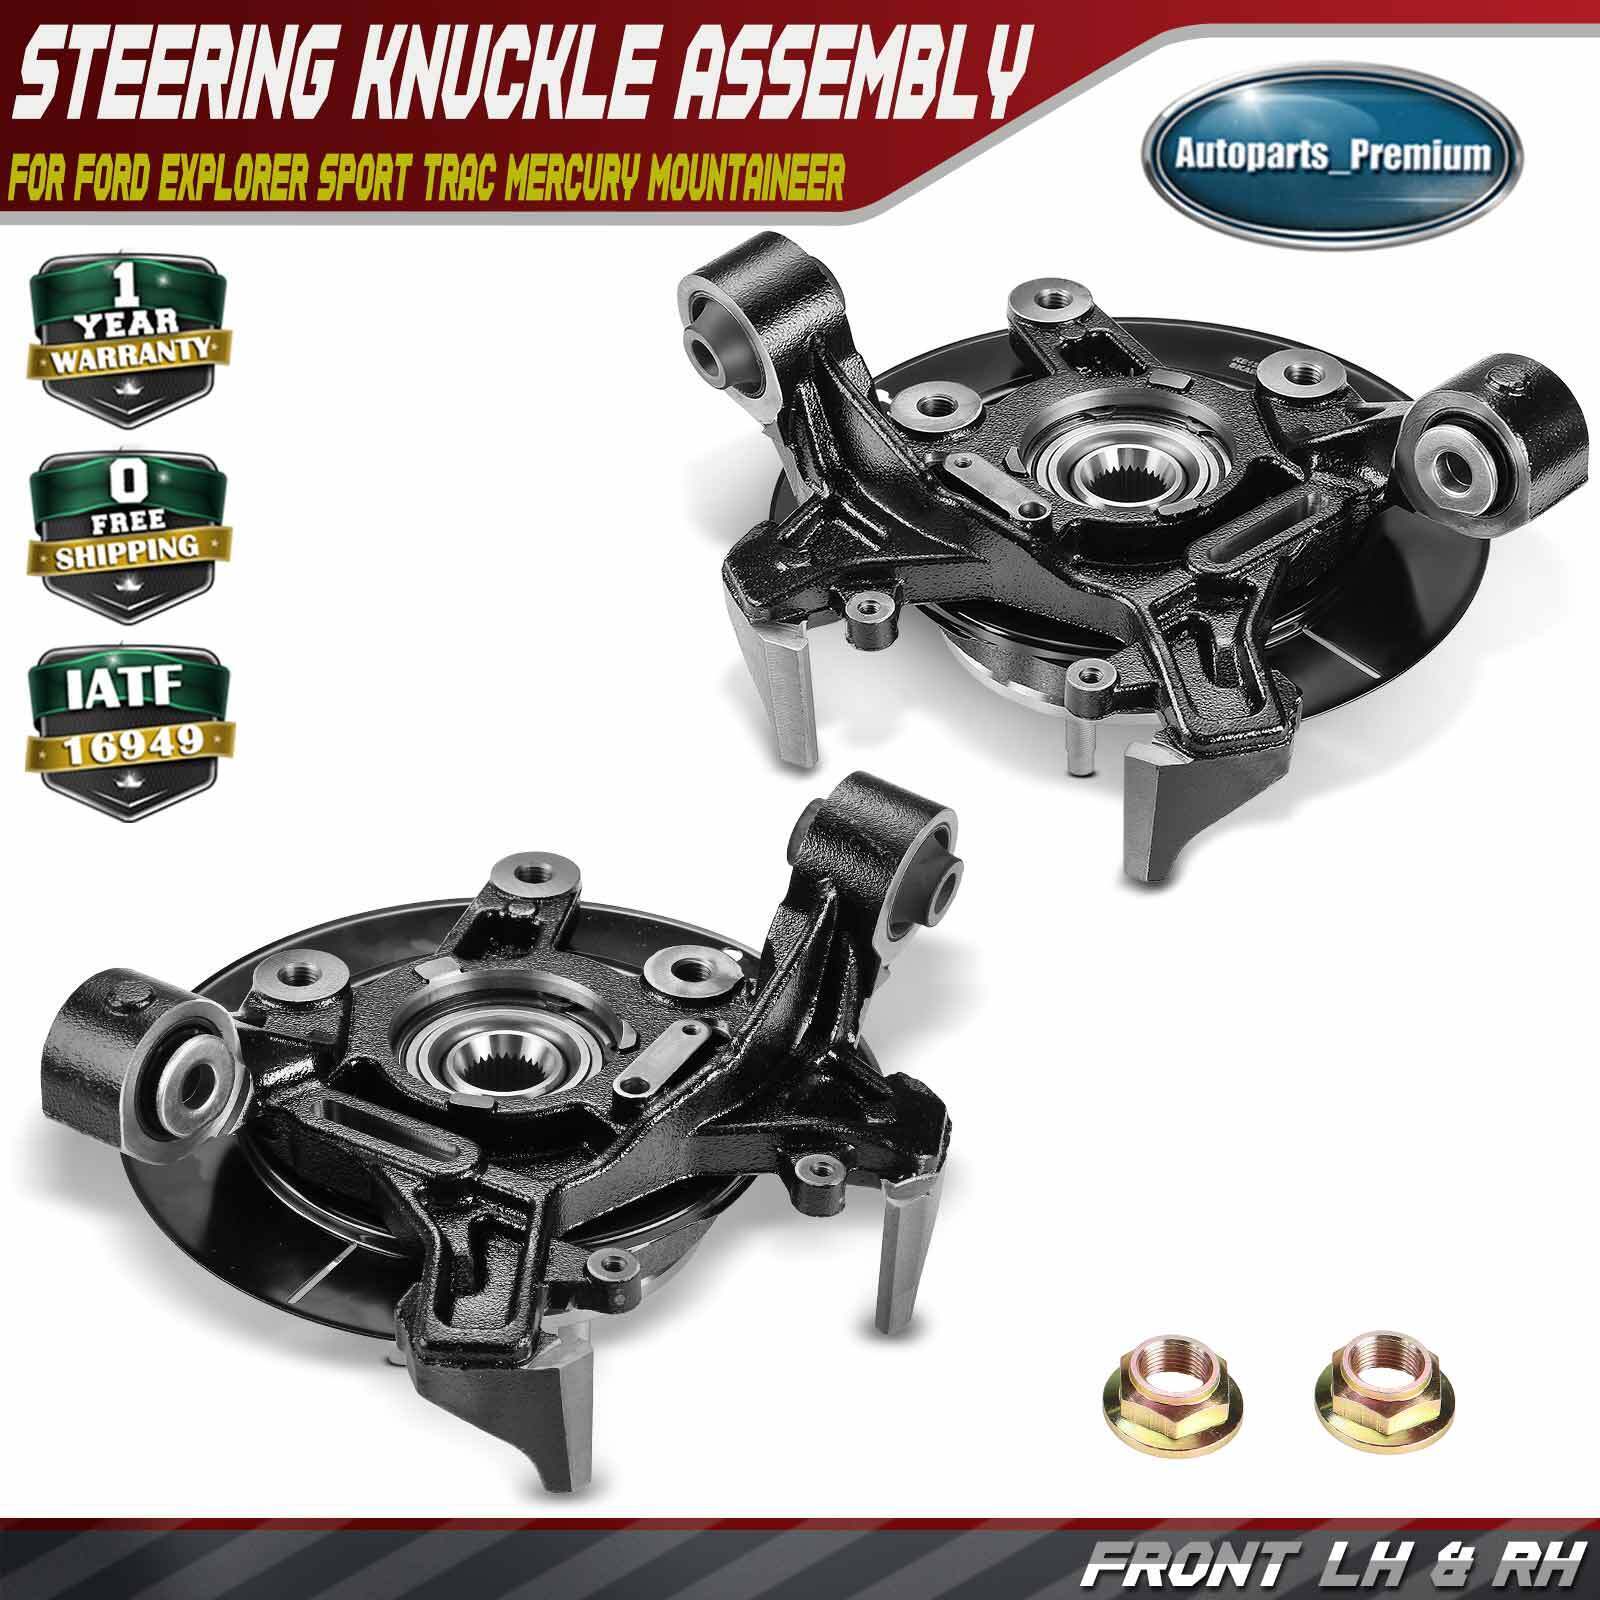 2x Rear Steering Knuckle & Wheel Hub Bearing Assembly for Ford Explorer 06-10